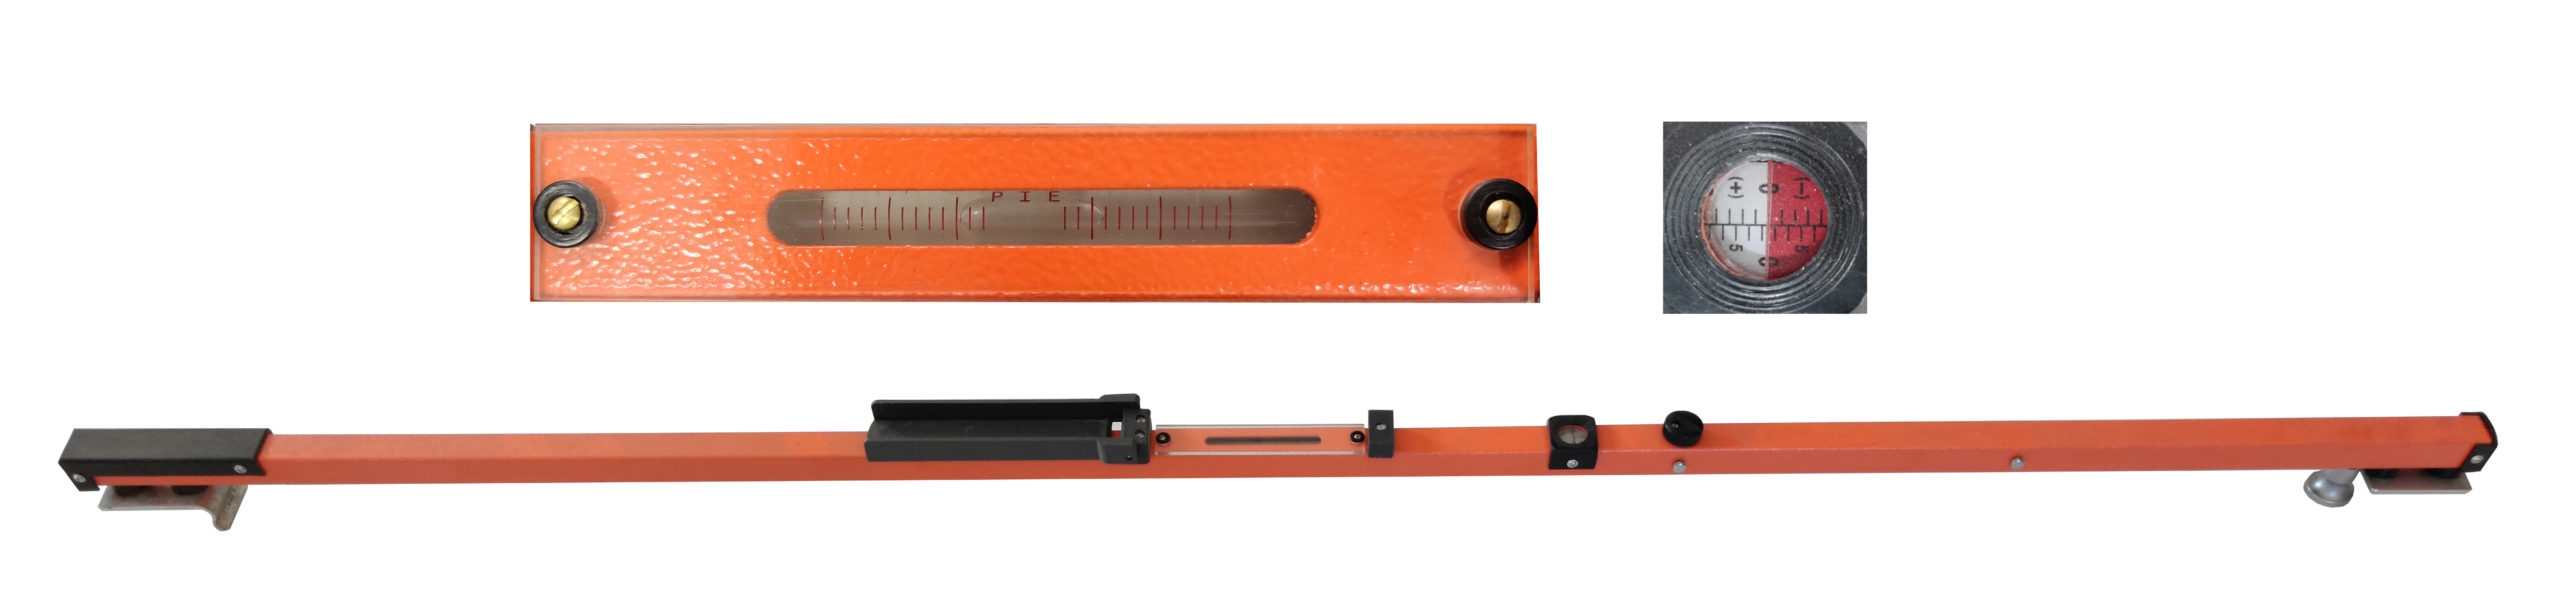 INSULATED TRACK GAUGE MODEL- ST-1